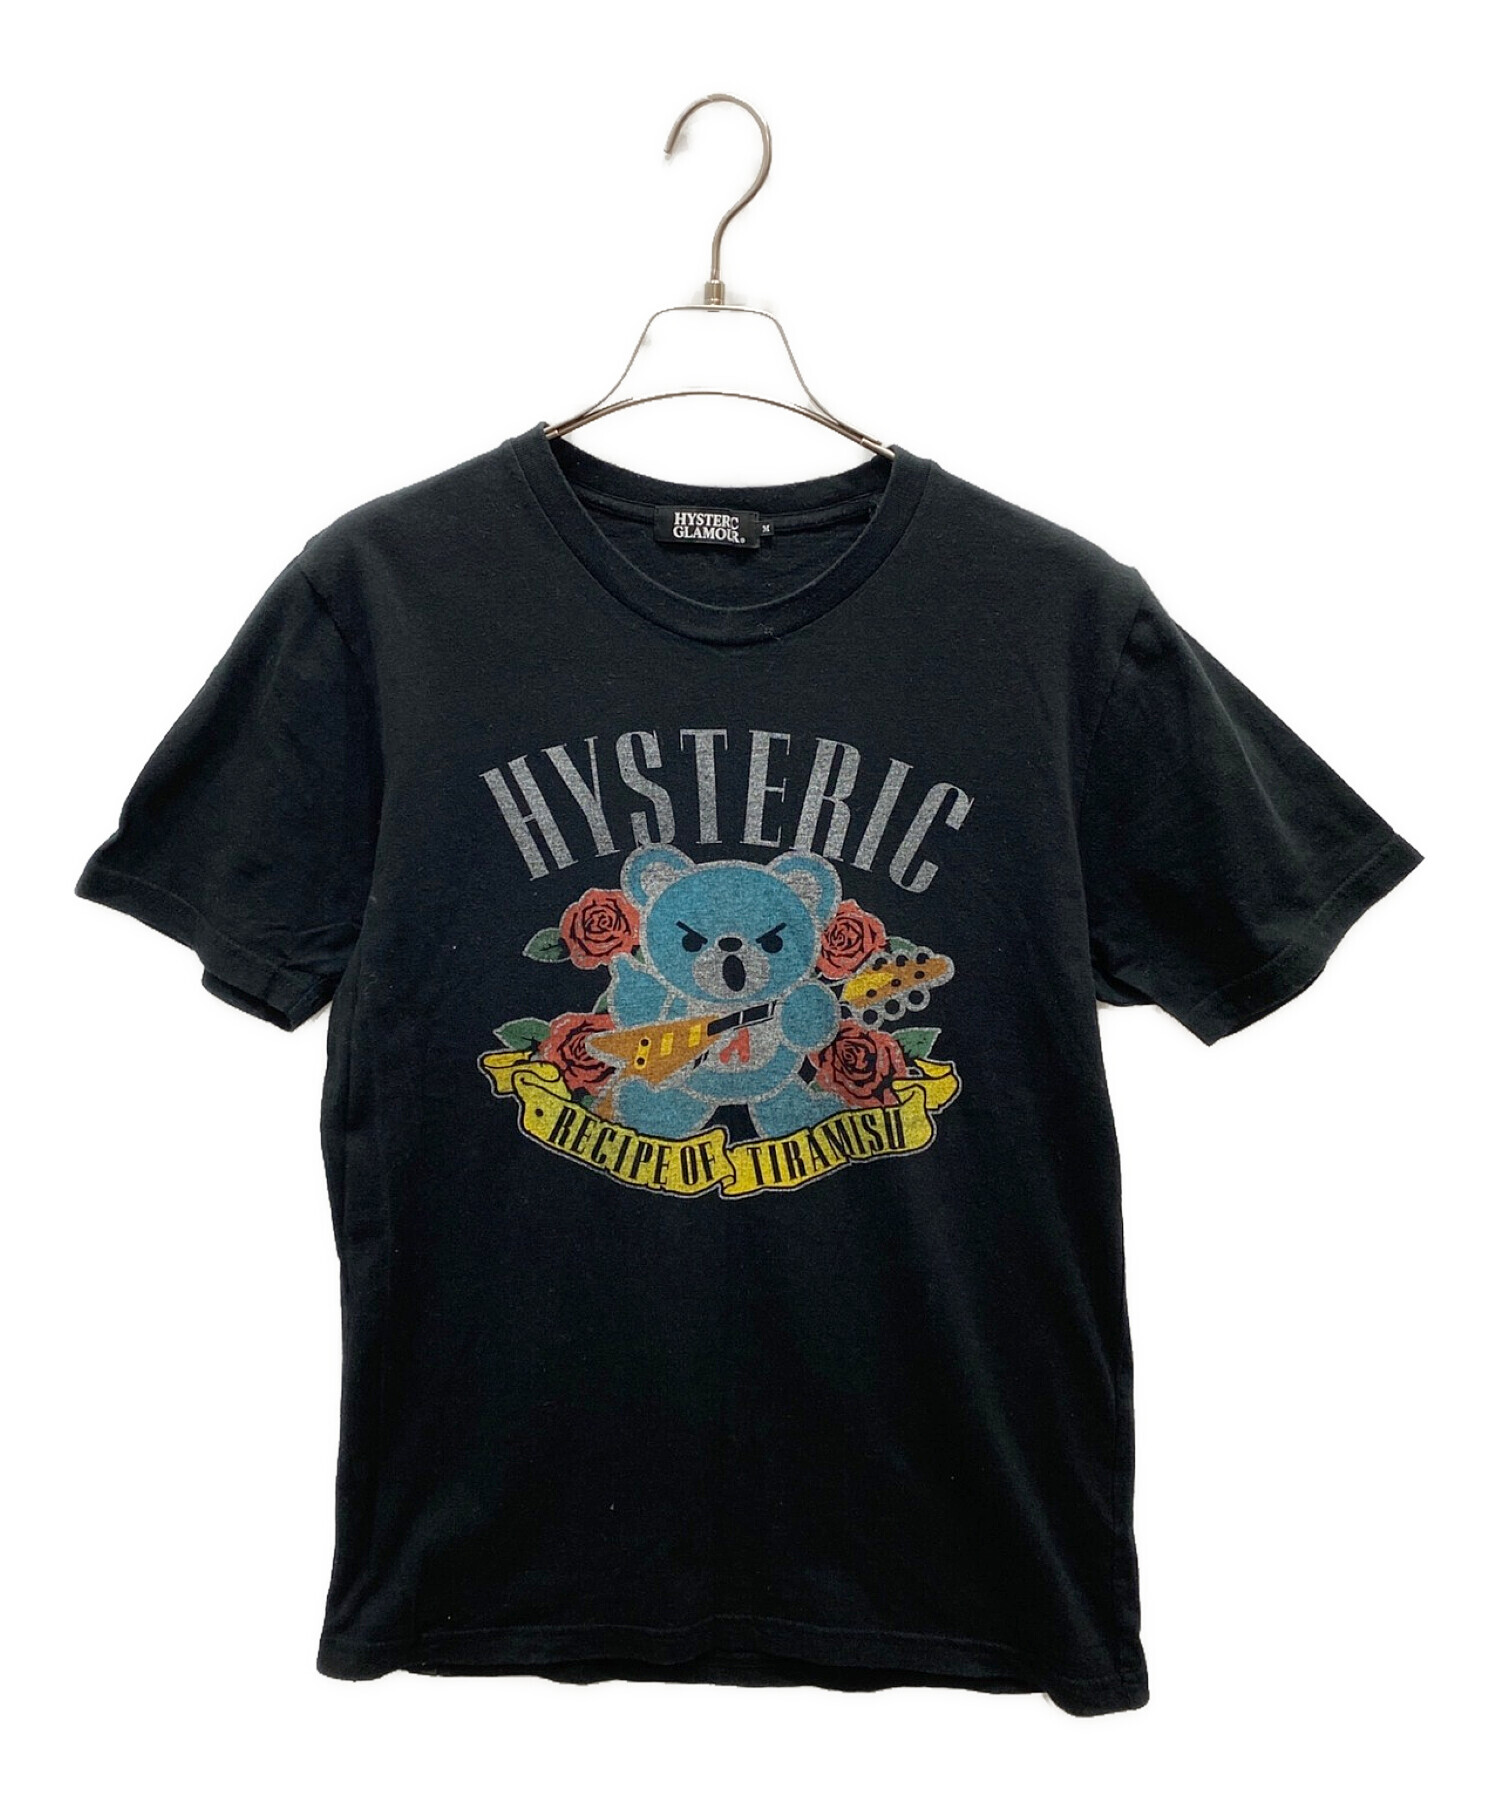 ☆Hysteric Gramour Fuck Bear プリントTシャツ-eastgate.mk